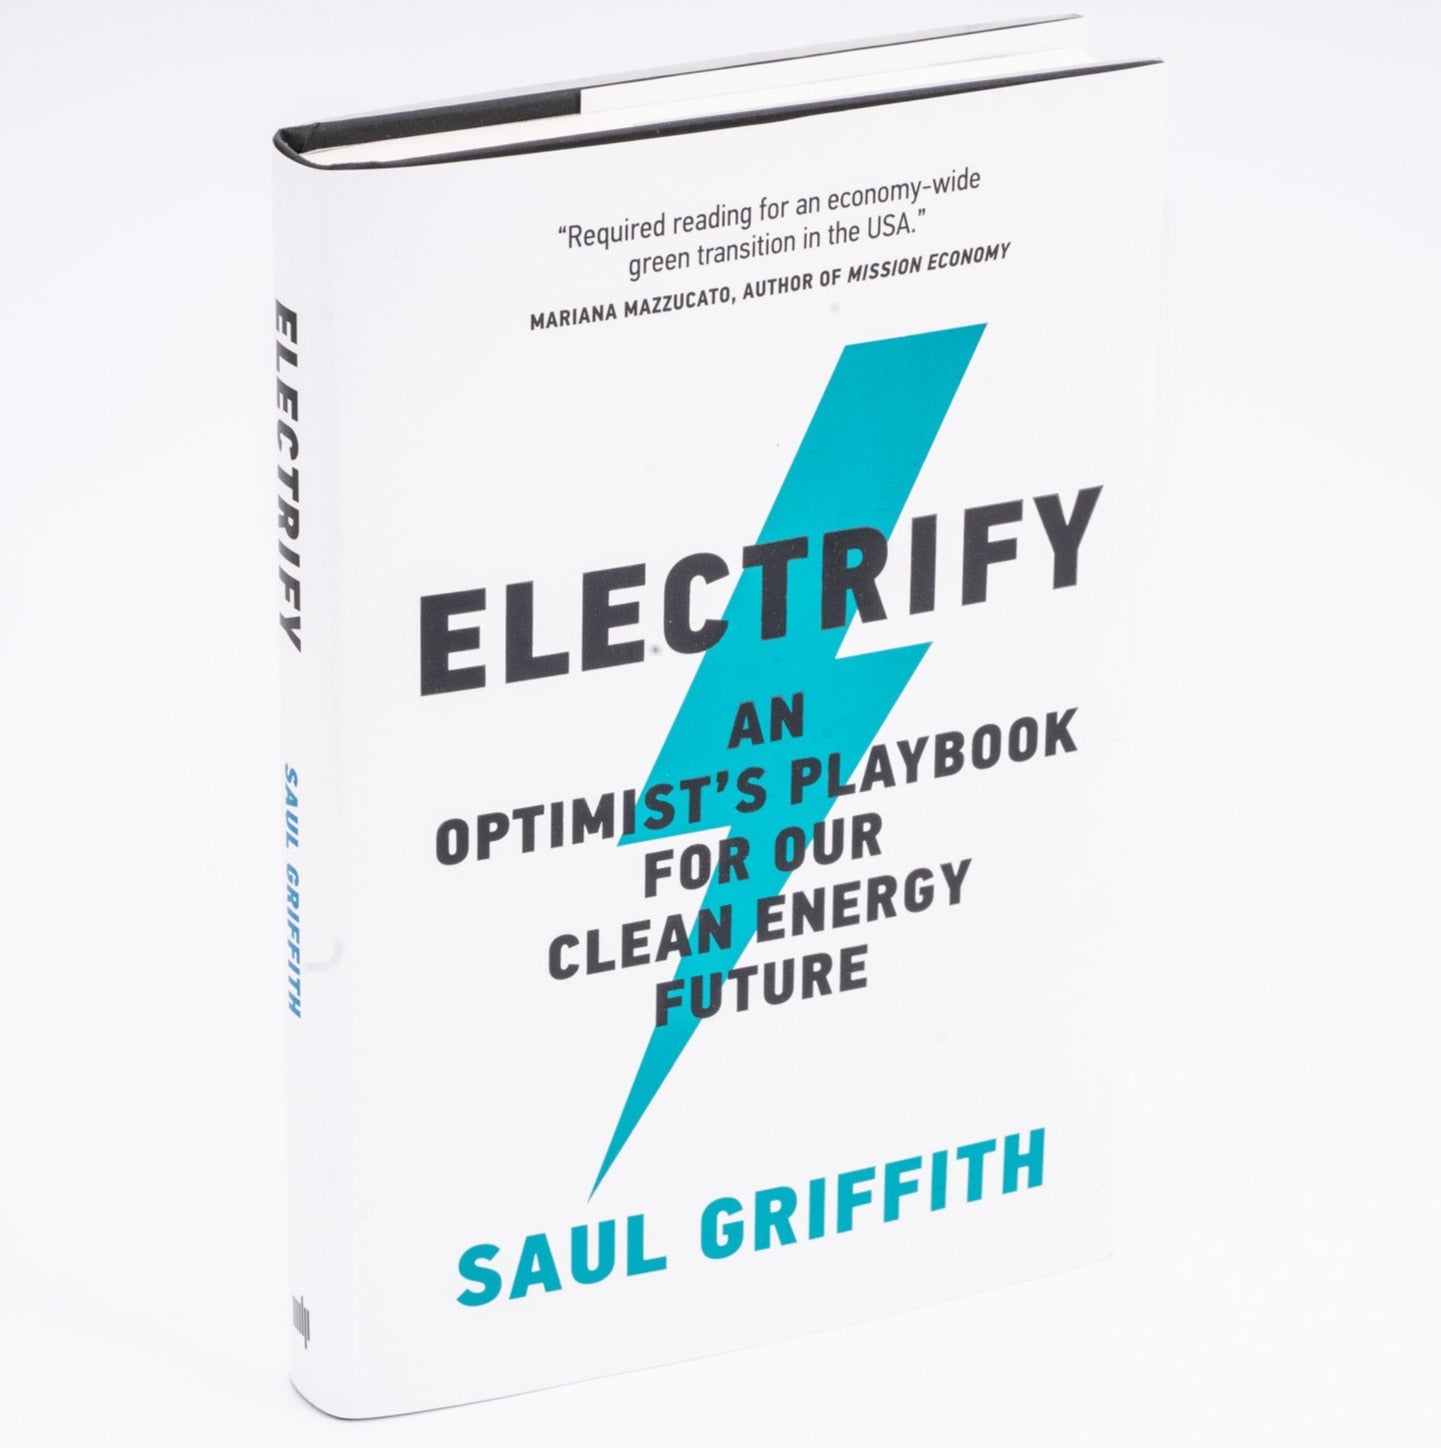 Electrify An Optimist's Playbook for Our Clean Energy Future By Saul Griffith